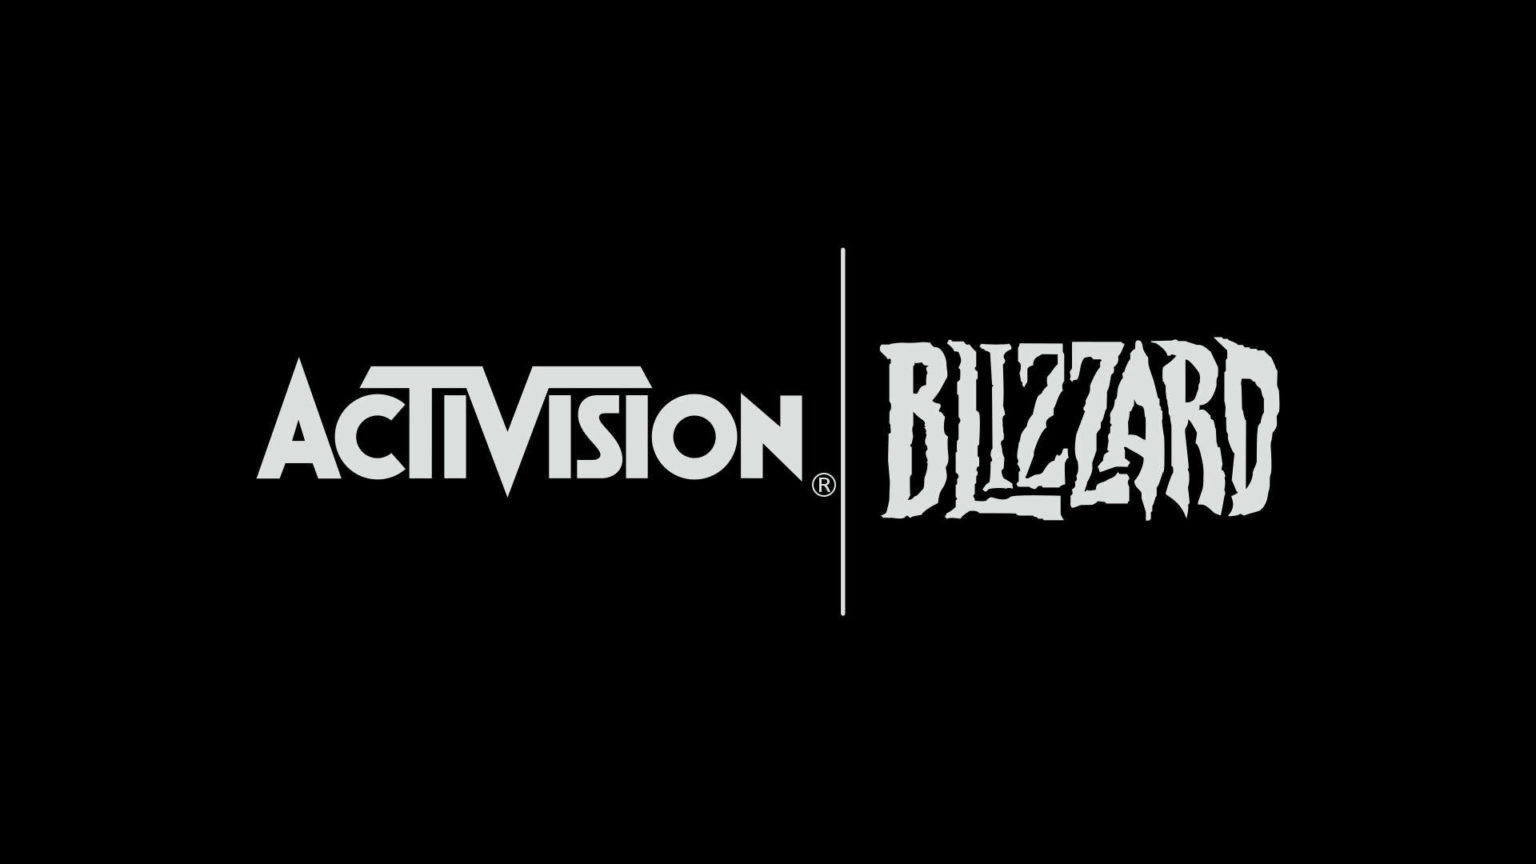 Microsoft CEO is confident that the acquisition of Activision Blizzard will not be blocked!